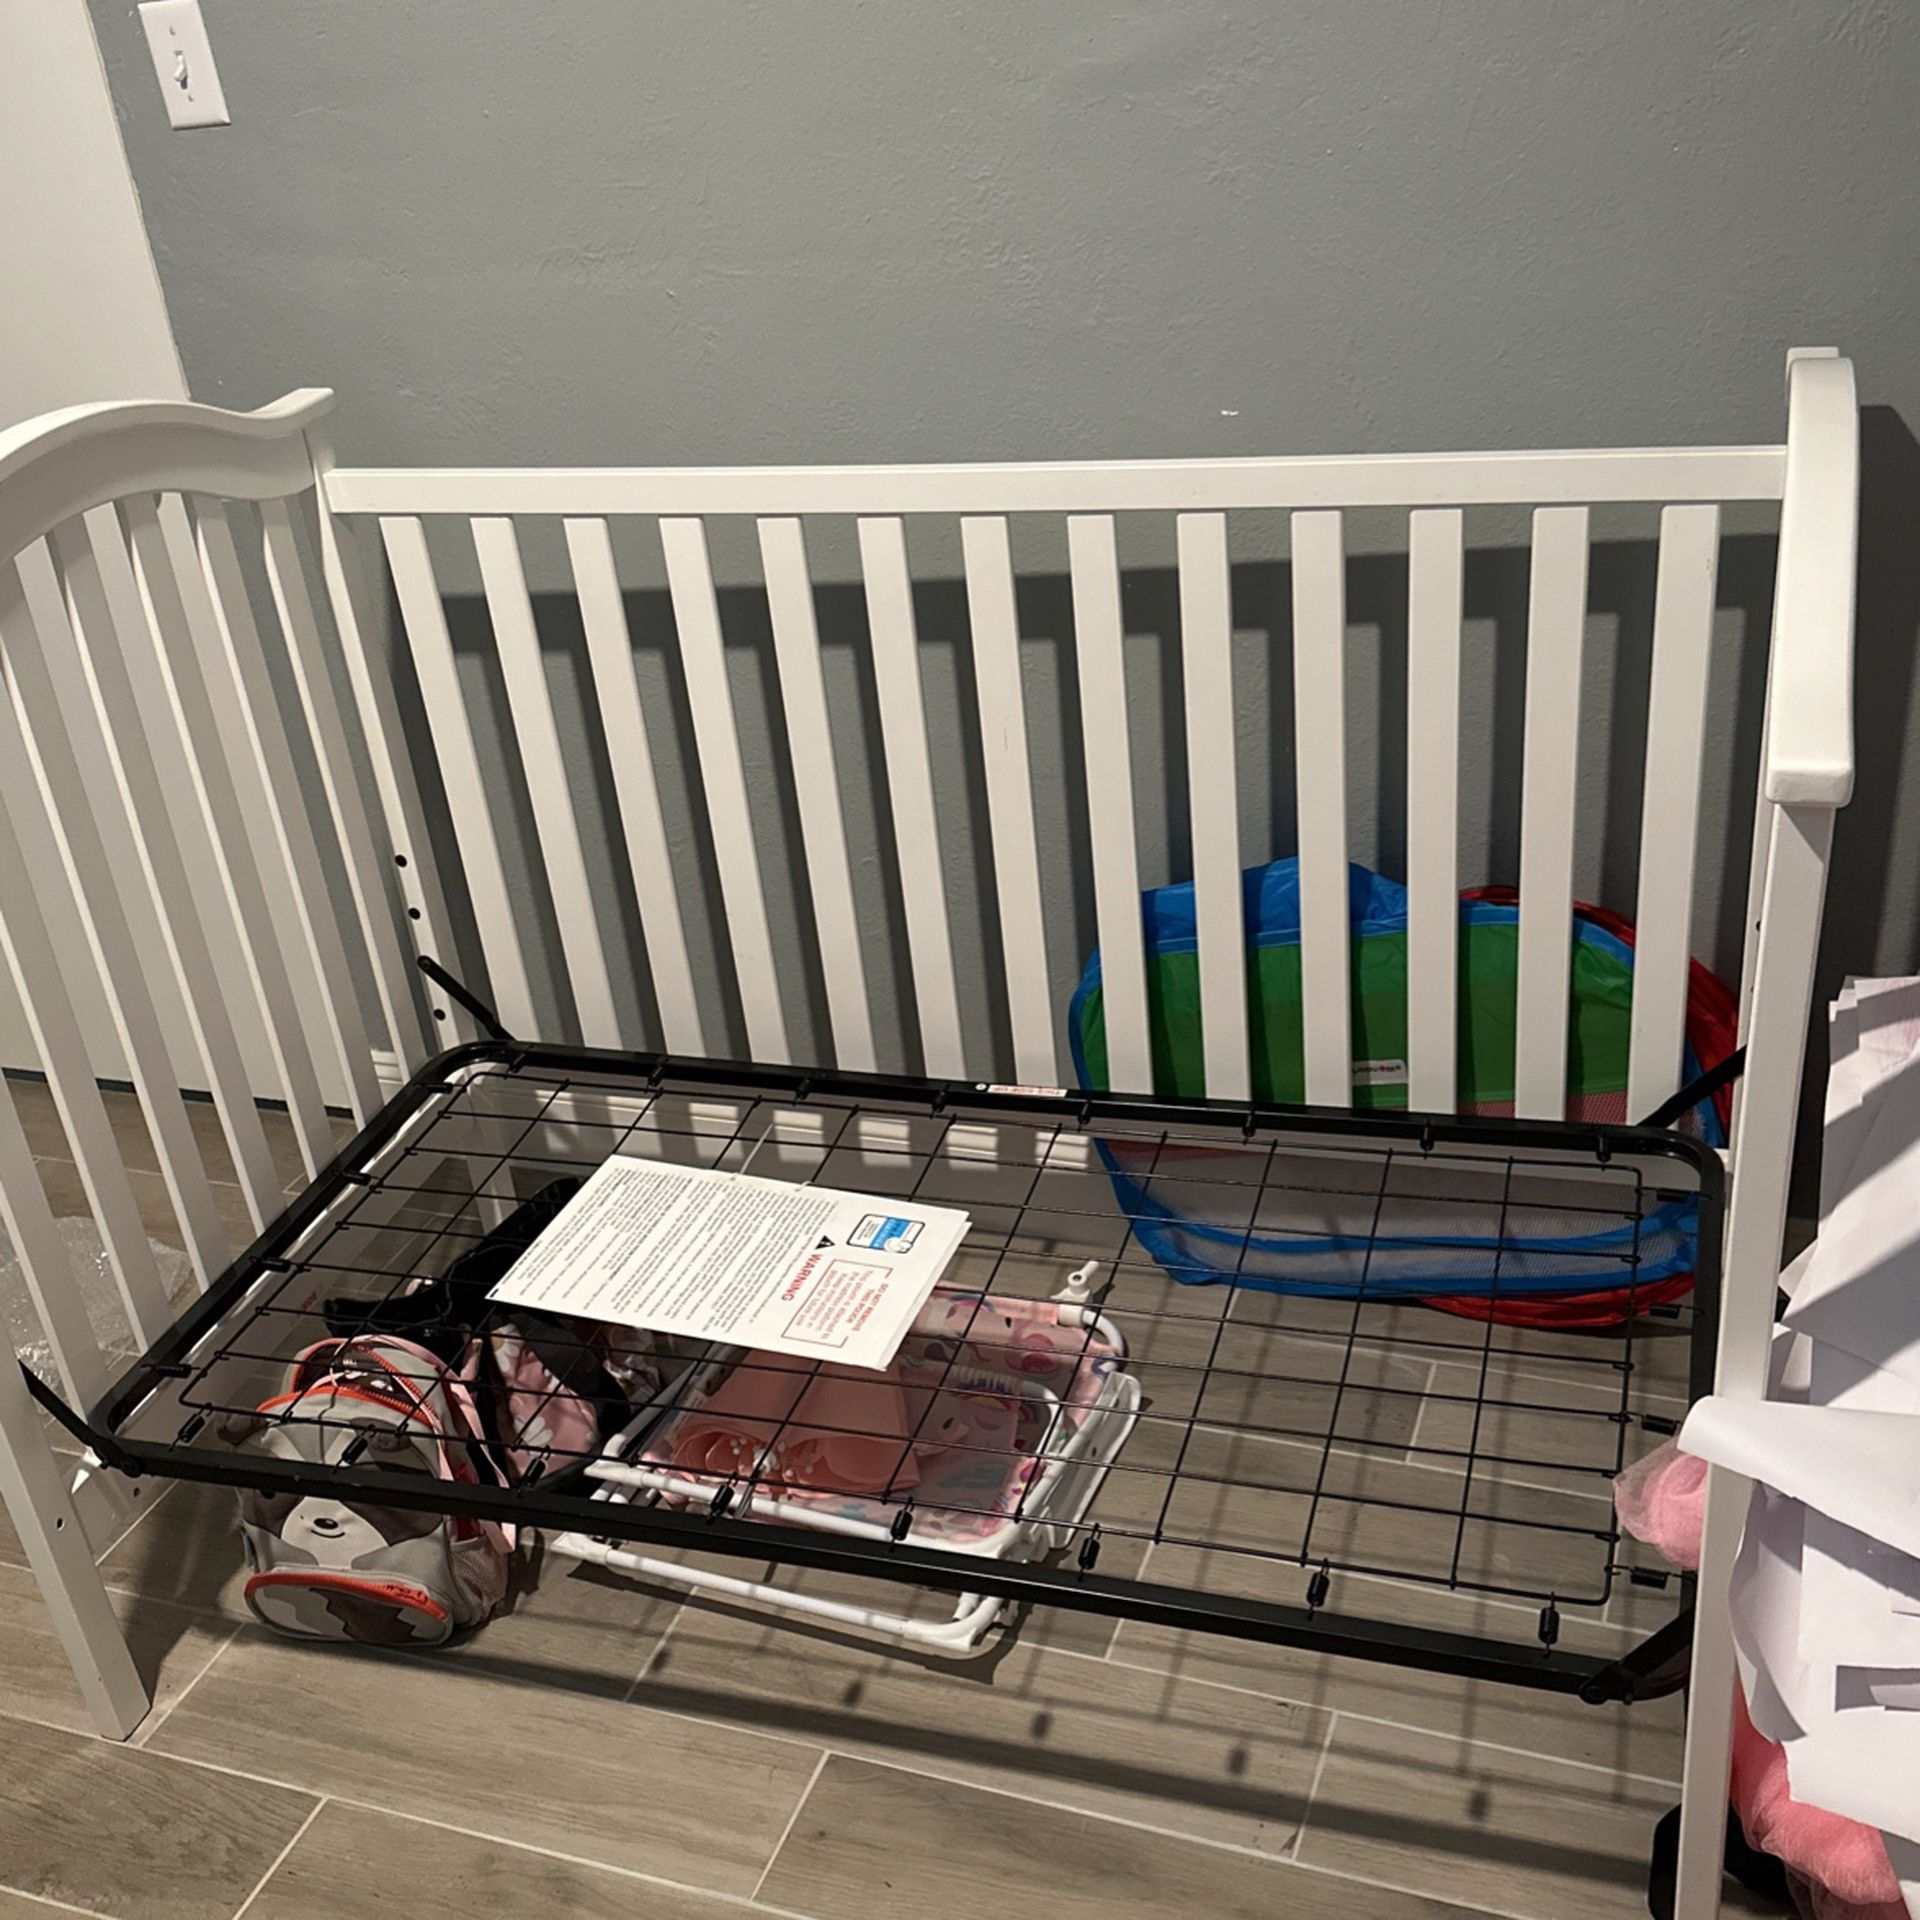 Crib/toddler Bed And Mattress And Side Rail